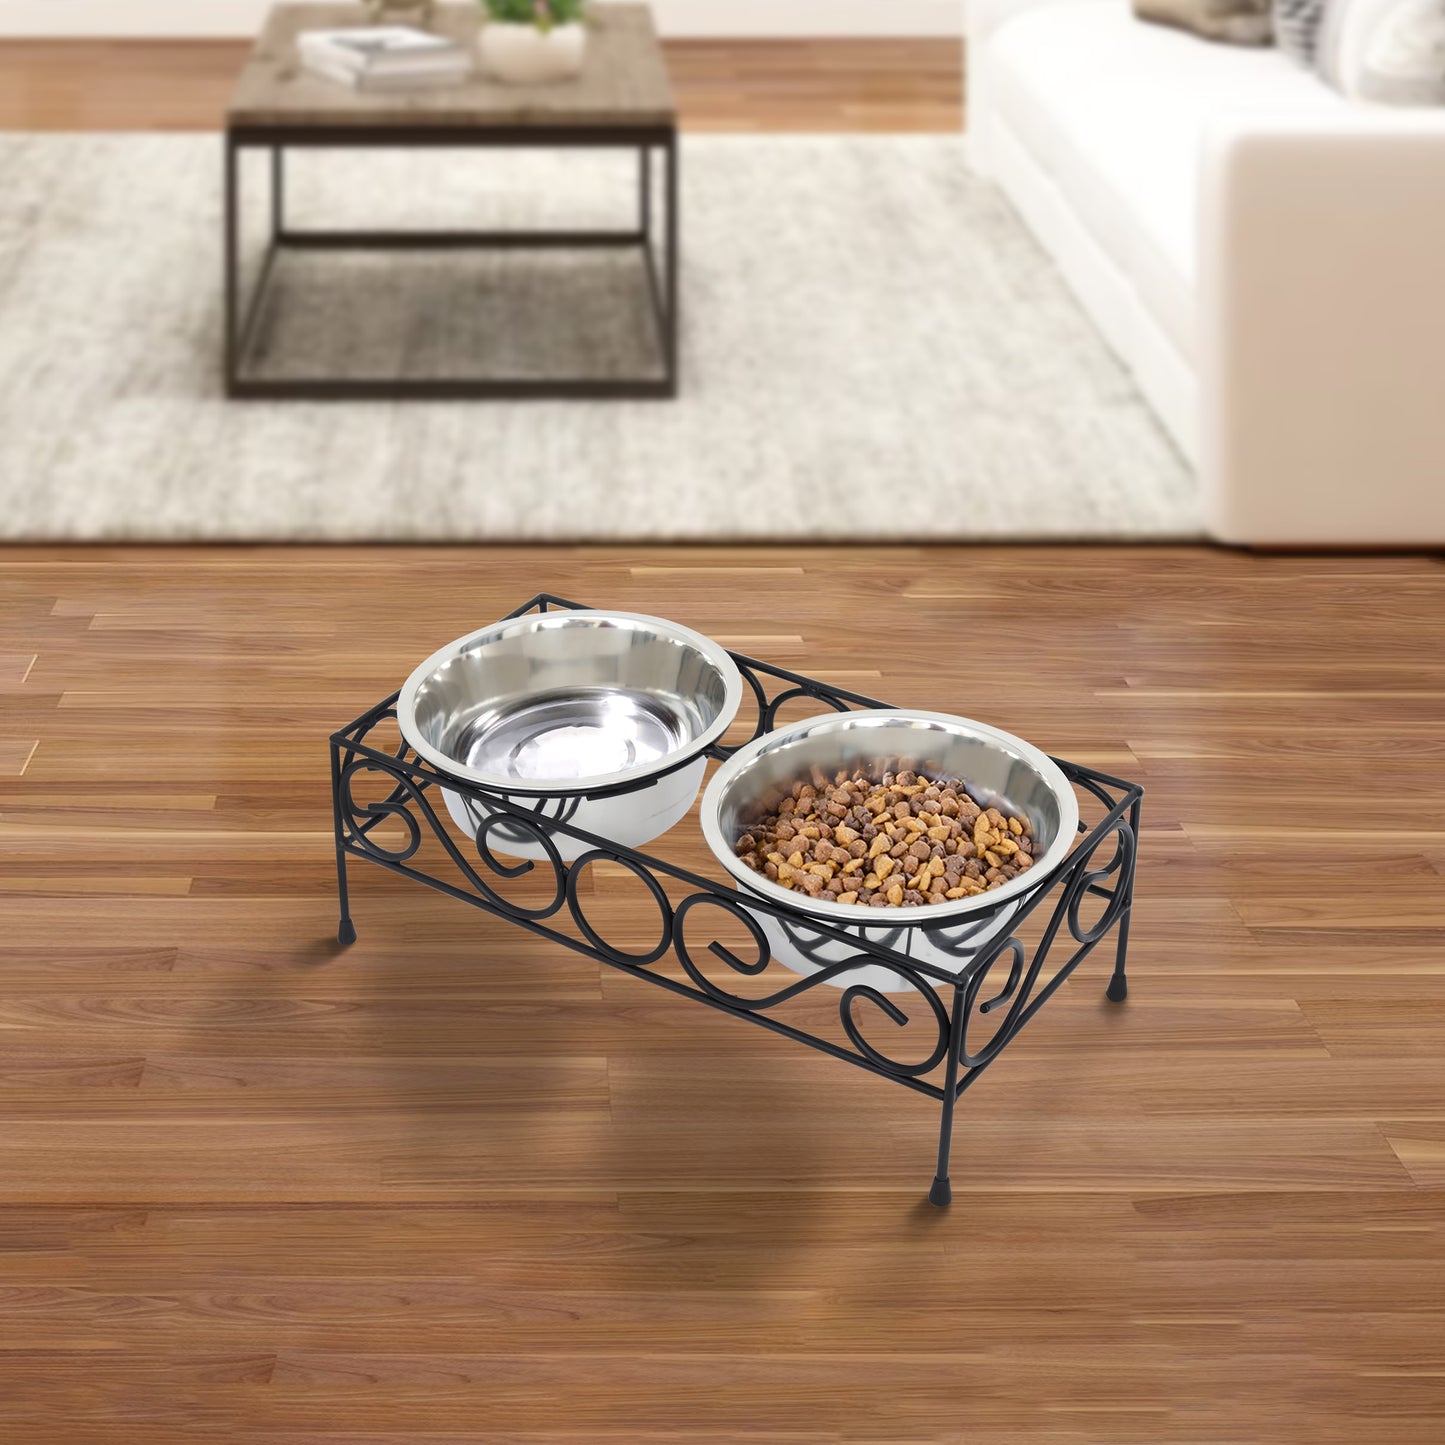 Elevated Wired Pet Double Diner with Stainless Steel Bowls for Dogs and Cats